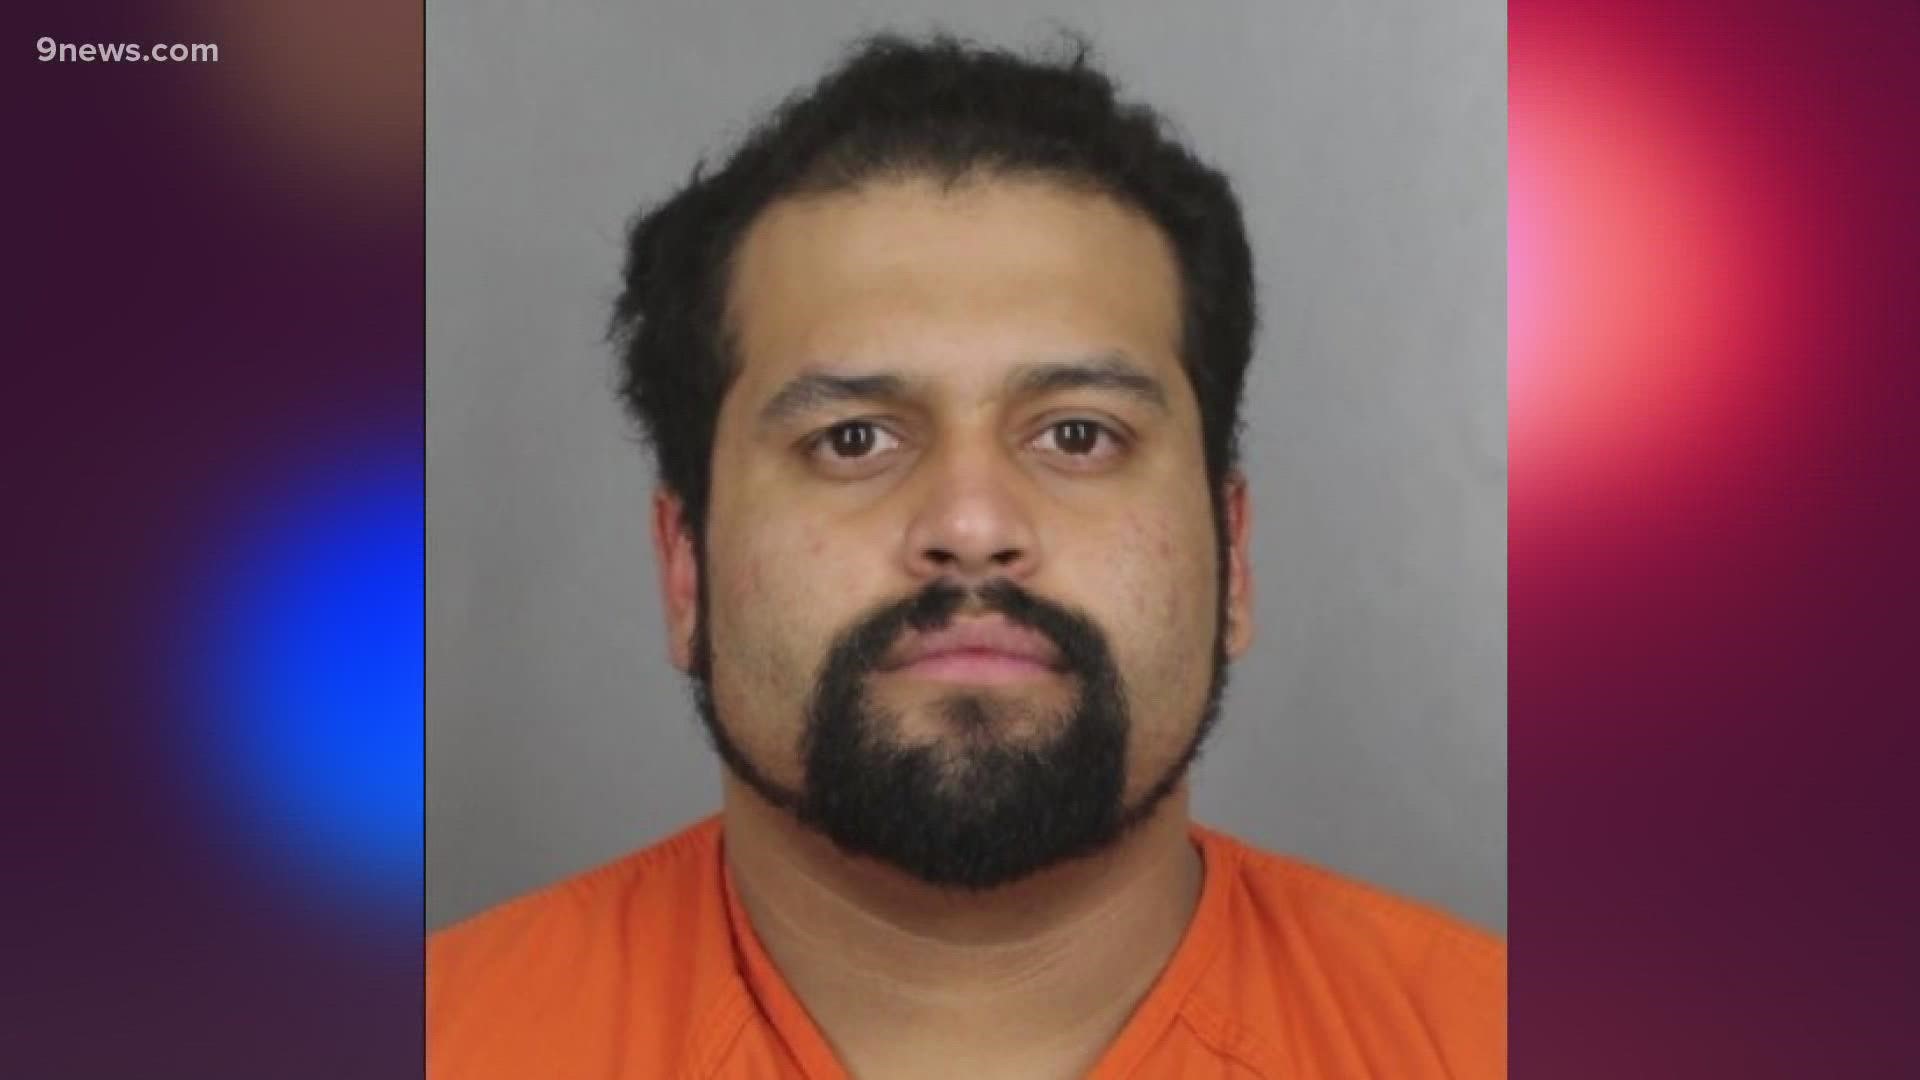 Rigoberto Dominguez, 33, is wanted in connection to the shooting of Officer David Snook and an armed carjacking, police said.